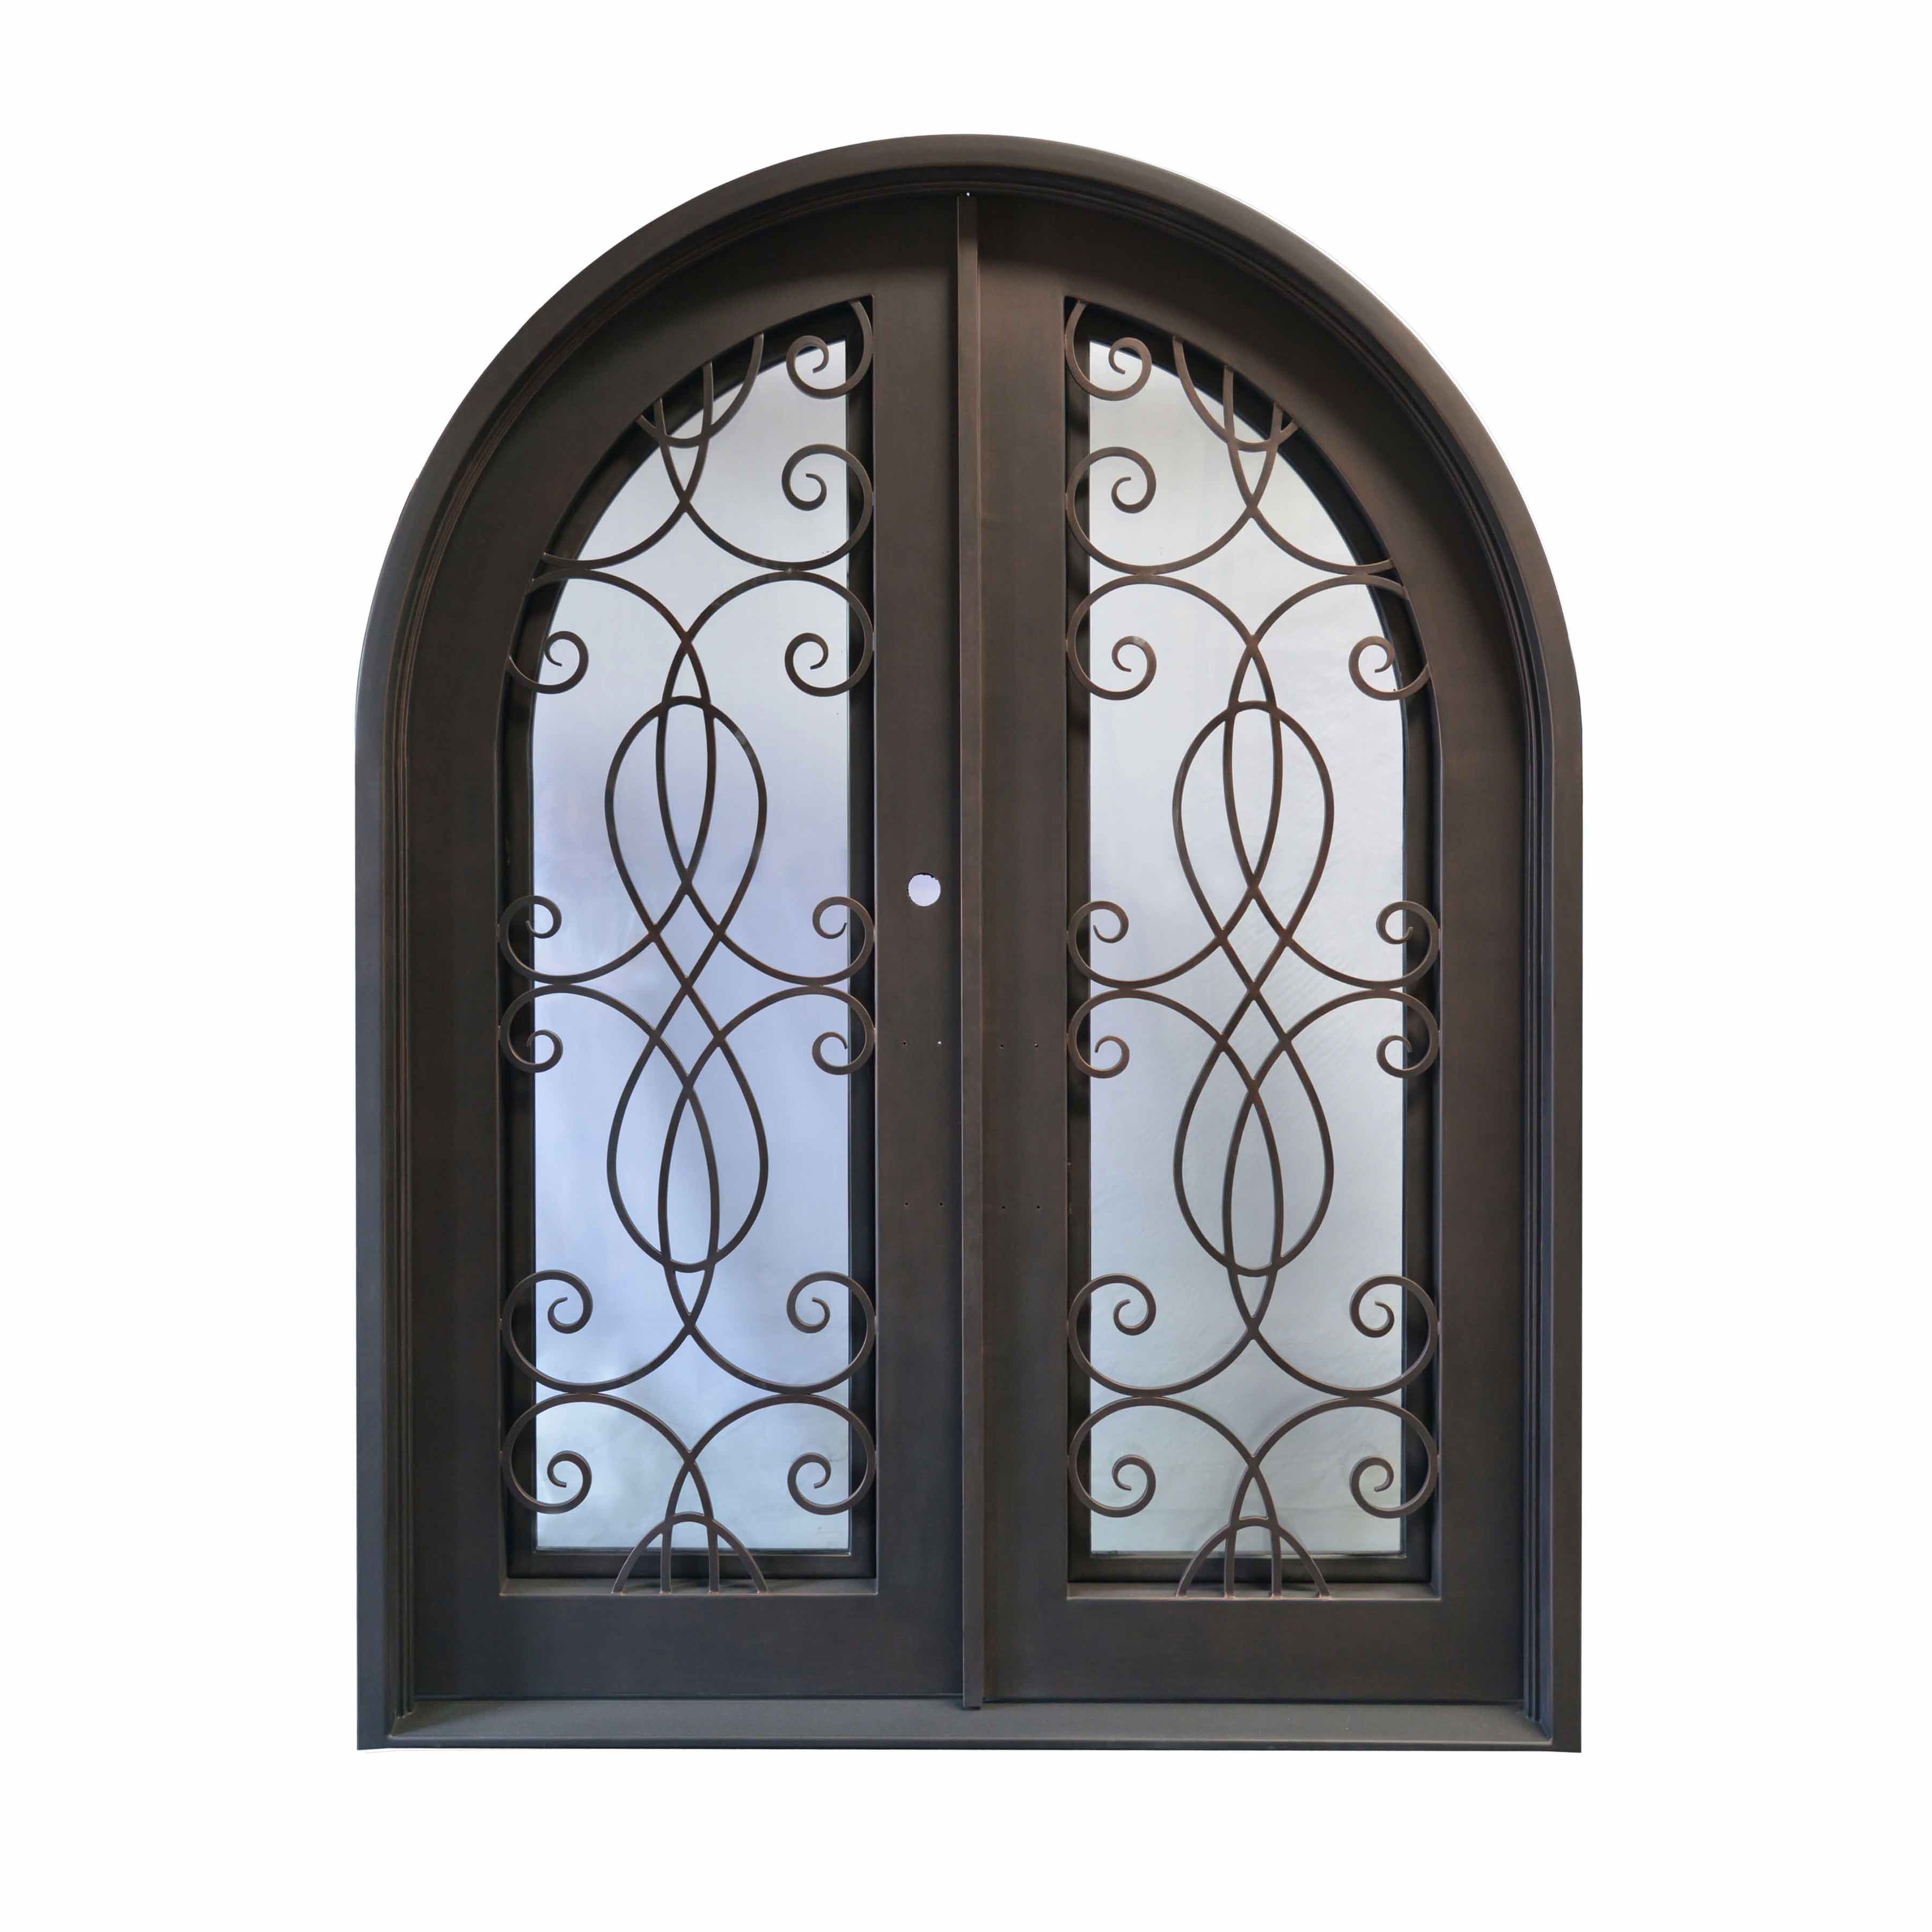 Big size iron forged double door with beautiful scrollwork